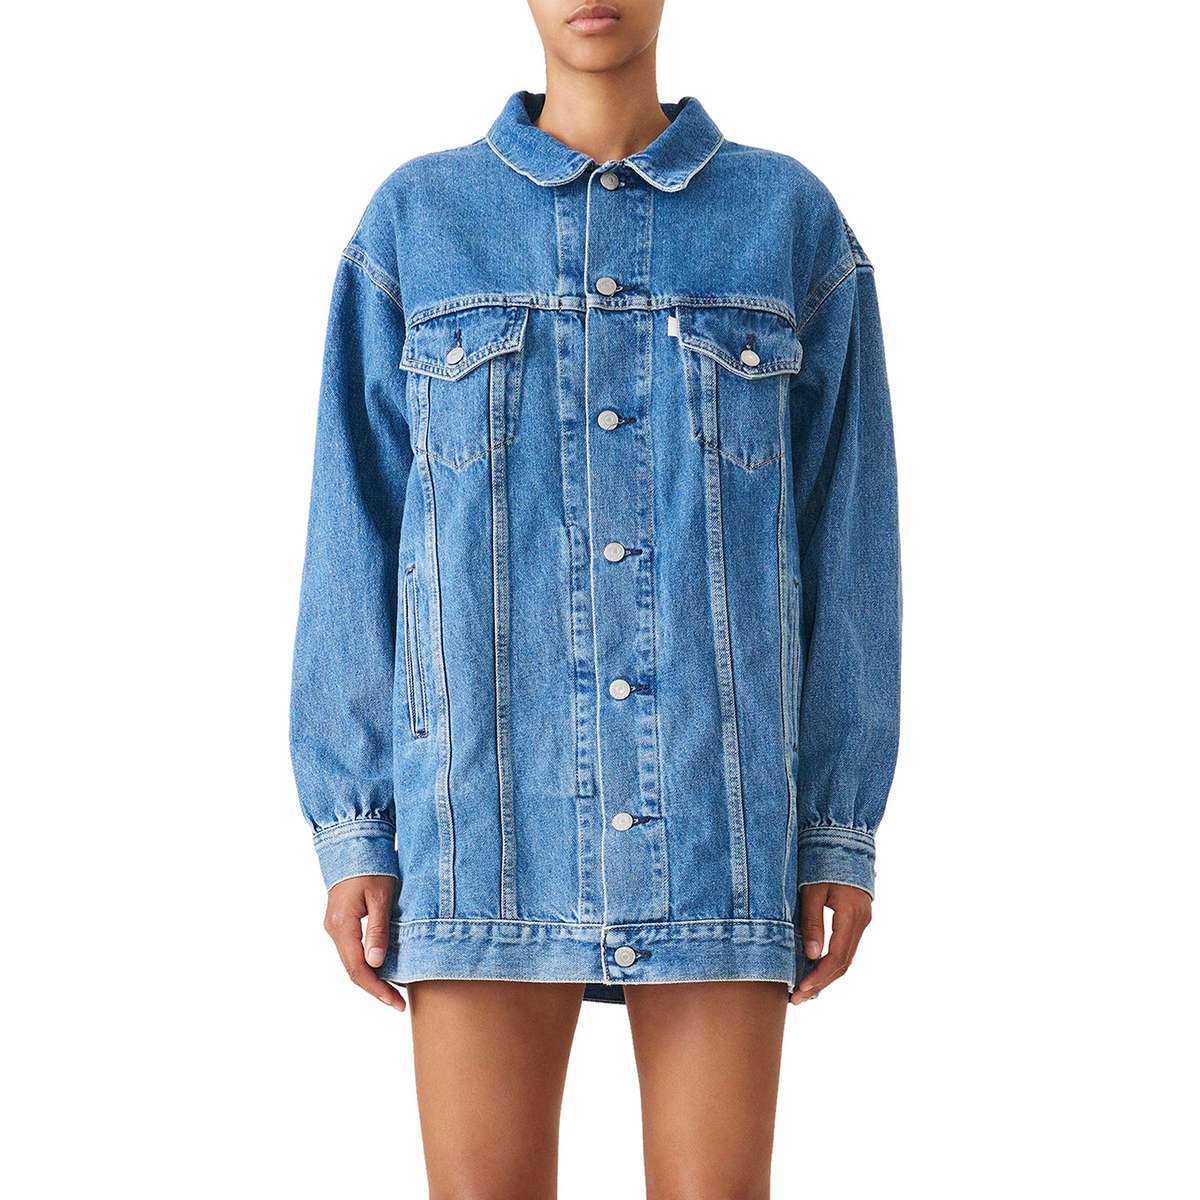 GANNI x Levi's collection in Nordstrom